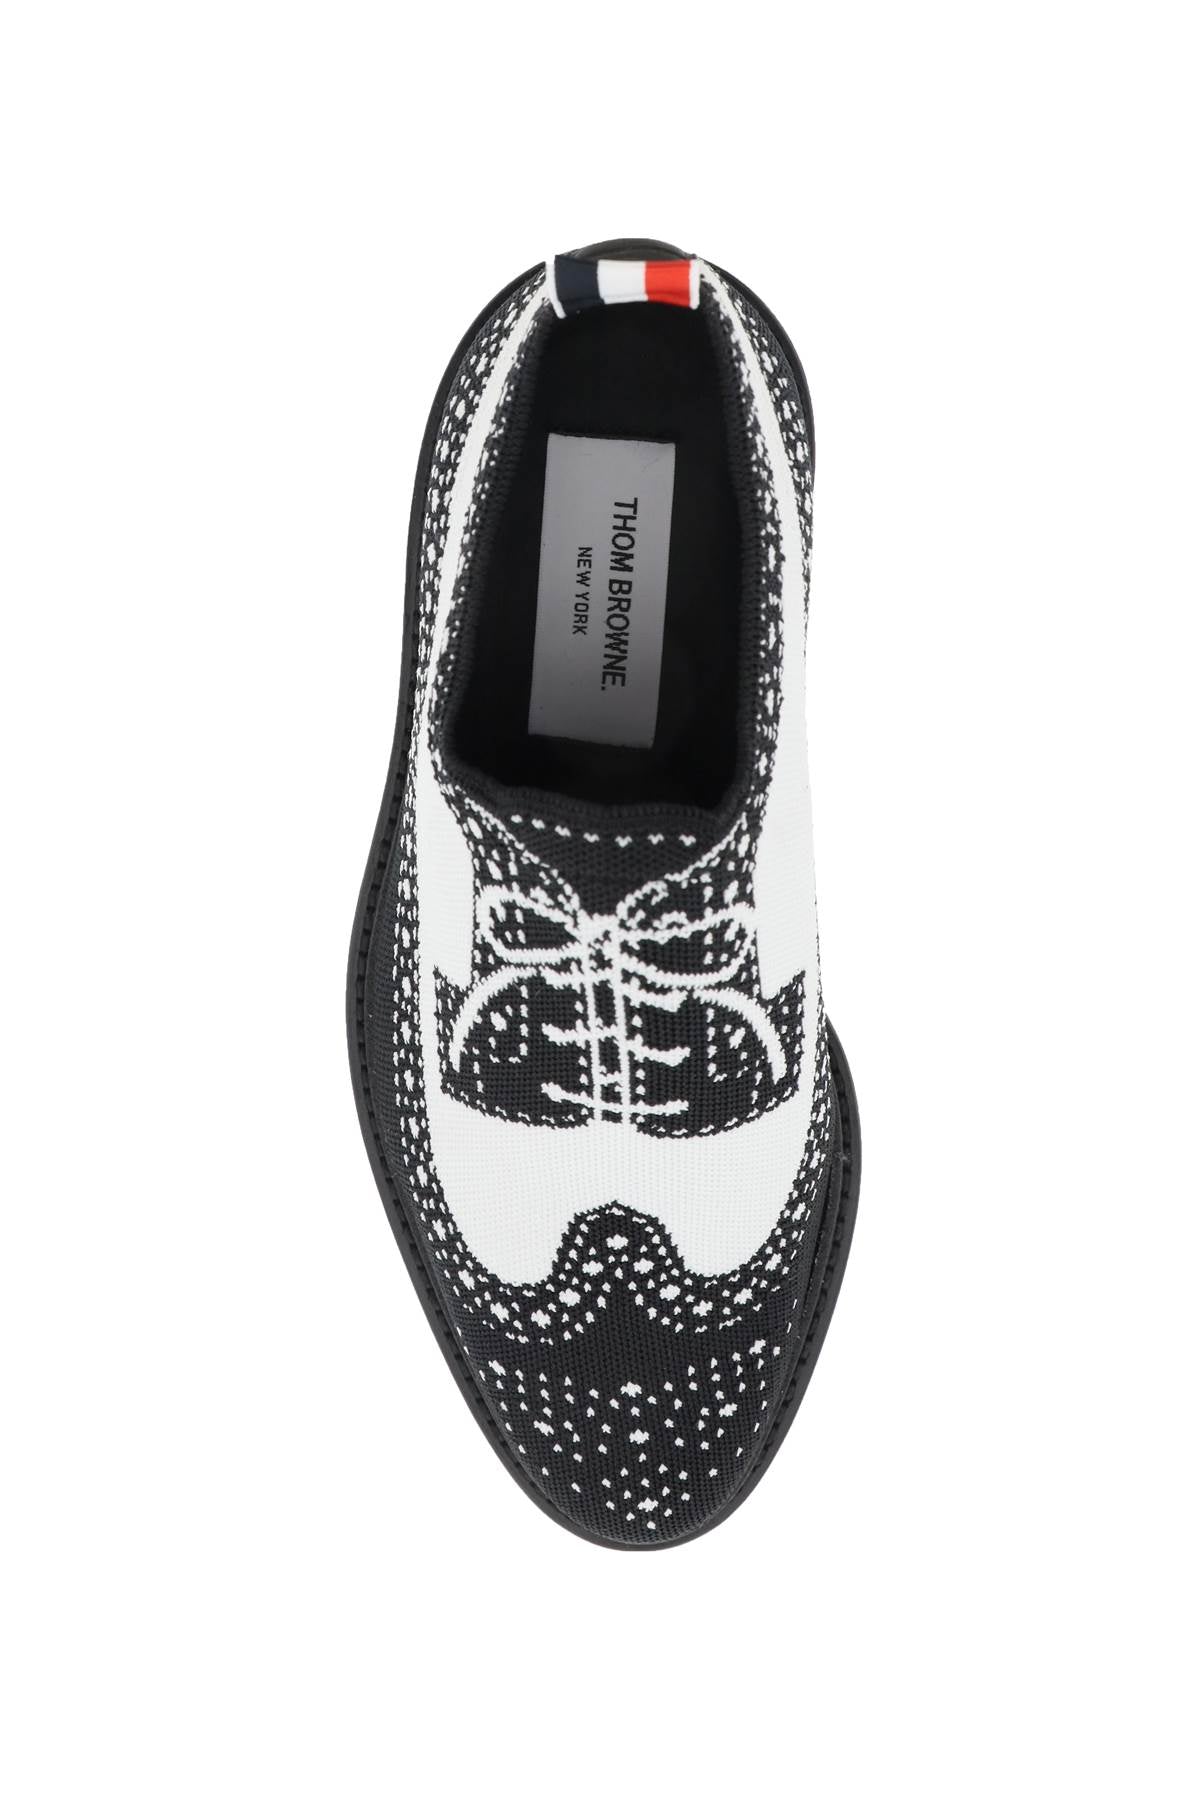 Thom browne longwing brogue loafers in trompe l'oeil knit-1